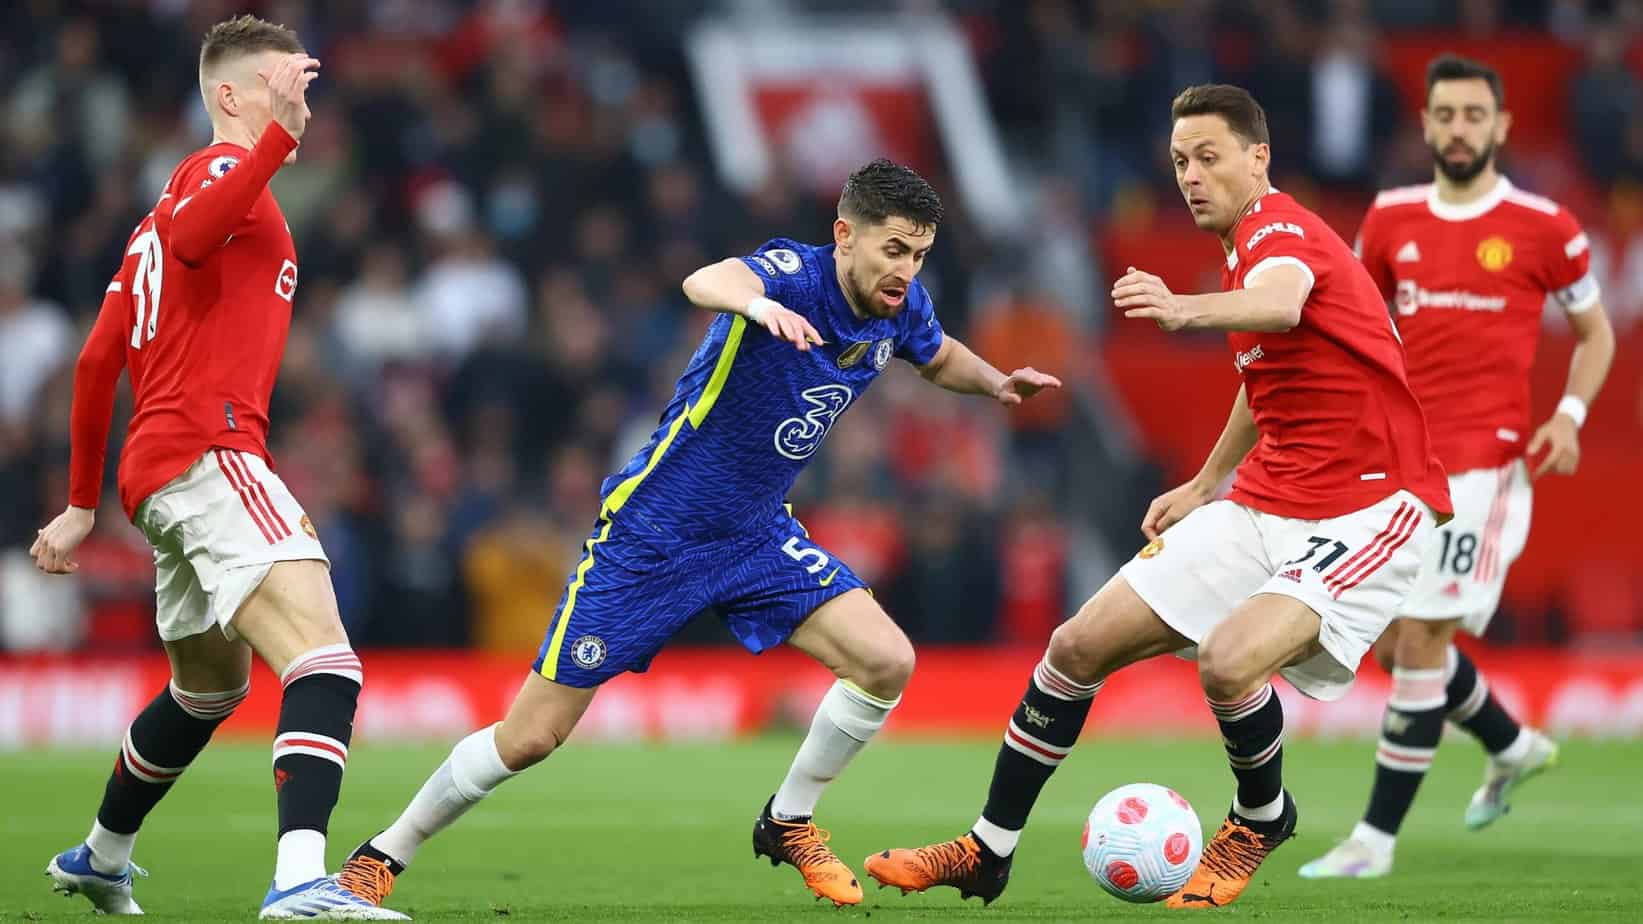 Manchester United vs. Chelsea Preview and Free Pick